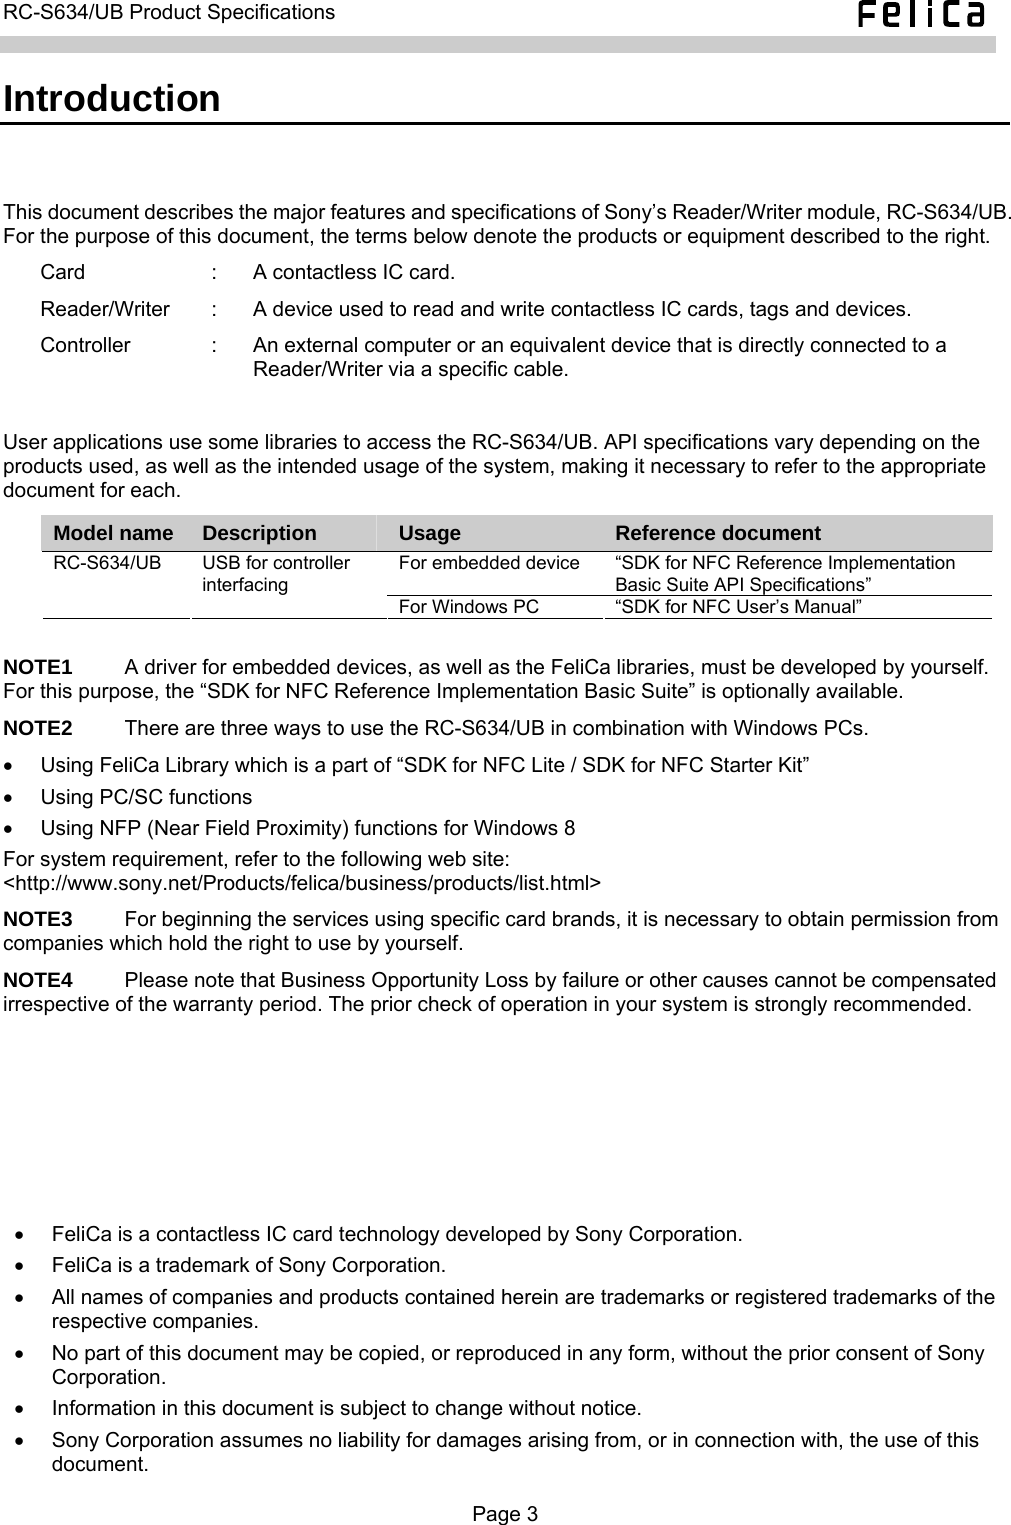   RC-S634/UB Product Specifications  Introduction This document describes the major features and specifications of Sony’s Reader/Writer module, RC-S634/UB. For the purpose of this document, the terms below denote the products or equipment described to the right. Card  :  A contactless IC card. Reader/Writer  :  A device used to read and write contactless IC cards, tags and devices. Controller  :  An external computer or an equivalent device that is directly connected to a Reader/Writer via a specific cable.  User applications use some libraries to access the RC-S634/UB. API specifications vary depending on the products used, as well as the intended usage of the system, making it necessary to refer to the appropriate document for each. Model name  Description  Usage  Reference document For embedded device  “SDK for NFC Reference Implementation Basic Suite API Specifications” RC-S634/UB  USB for controller interfacing For Windows PC  “SDK for NFC User’s Manual”  NOTE1          A driver for embedded devices, as well as the FeliCa libraries, must be developed by yourself. For this purpose, the “SDK for NFC Reference Implementation Basic Suite” is optionally available. NOTE2          There are three ways to use the RC-S634/UB in combination with Windows PCs. •  Using FeliCa Library which is a part of “SDK for NFC Lite / SDK for NFC Starter Kit” •  Using PC/SC functions •  Using NFP (Near Field Proximity) functions for Windows 8 For system requirement, refer to the following web site: &lt;http://www.sony.net/Products/felica/business/products/list.html&gt; NOTE3     For beginning the services using specific card brands, it is necessary to obtain permission from companies which hold the right to use by yourself. NOTE4     Please note that Business Opportunity Loss by failure or other causes cannot be compensated irrespective of the warranty period. The prior check of operation in your system is strongly recommended. •  FeliCa is a contactless IC card technology developed by Sony Corporation. •  FeliCa is a trademark of Sony Corporation. •  All names of companies and products contained herein are trademarks or registered trademarks of the respective companies. •  No part of this document may be copied, or reproduced in any form, without the prior consent of Sony Corporation. •  Information in this document is subject to change without notice. •  Sony Corporation assumes no liability for damages arising from, or in connection with, the use of this document.  Page 3  